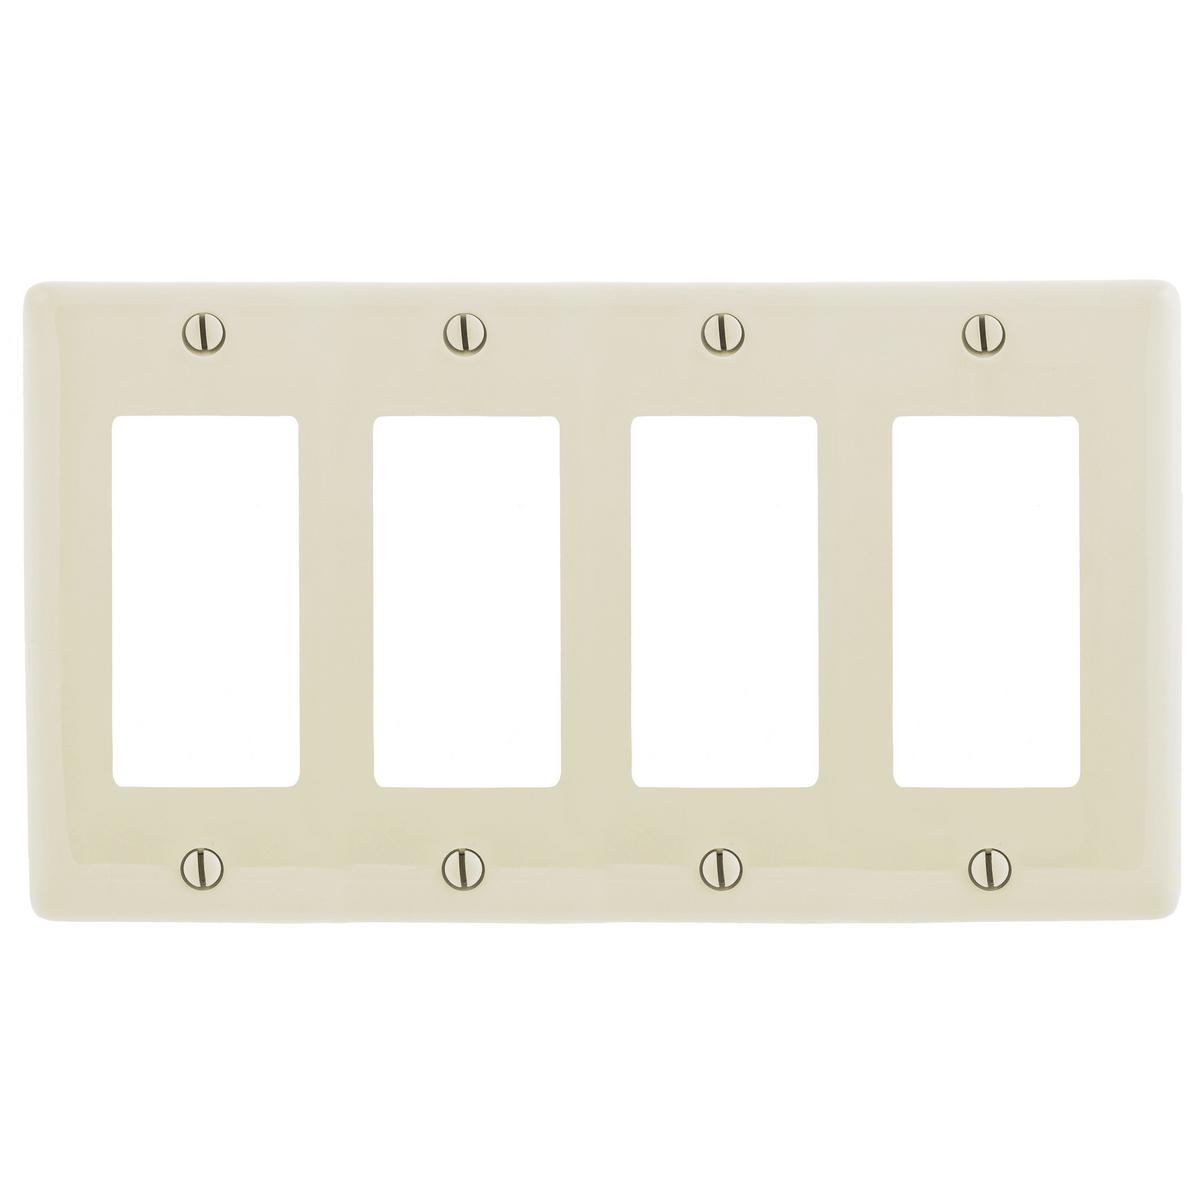 Hubbell NP264LA Wallplates and Box Covers, Wallplate, Nylon, 4-Gang, 4) Decorator, Light Almond  ; Reinforcement ribs for extra strength ; Captive screw feature holds mounting screw in place ; High-impact, self-extinguishing nylon material ; Standard Size is 1/8" larger 